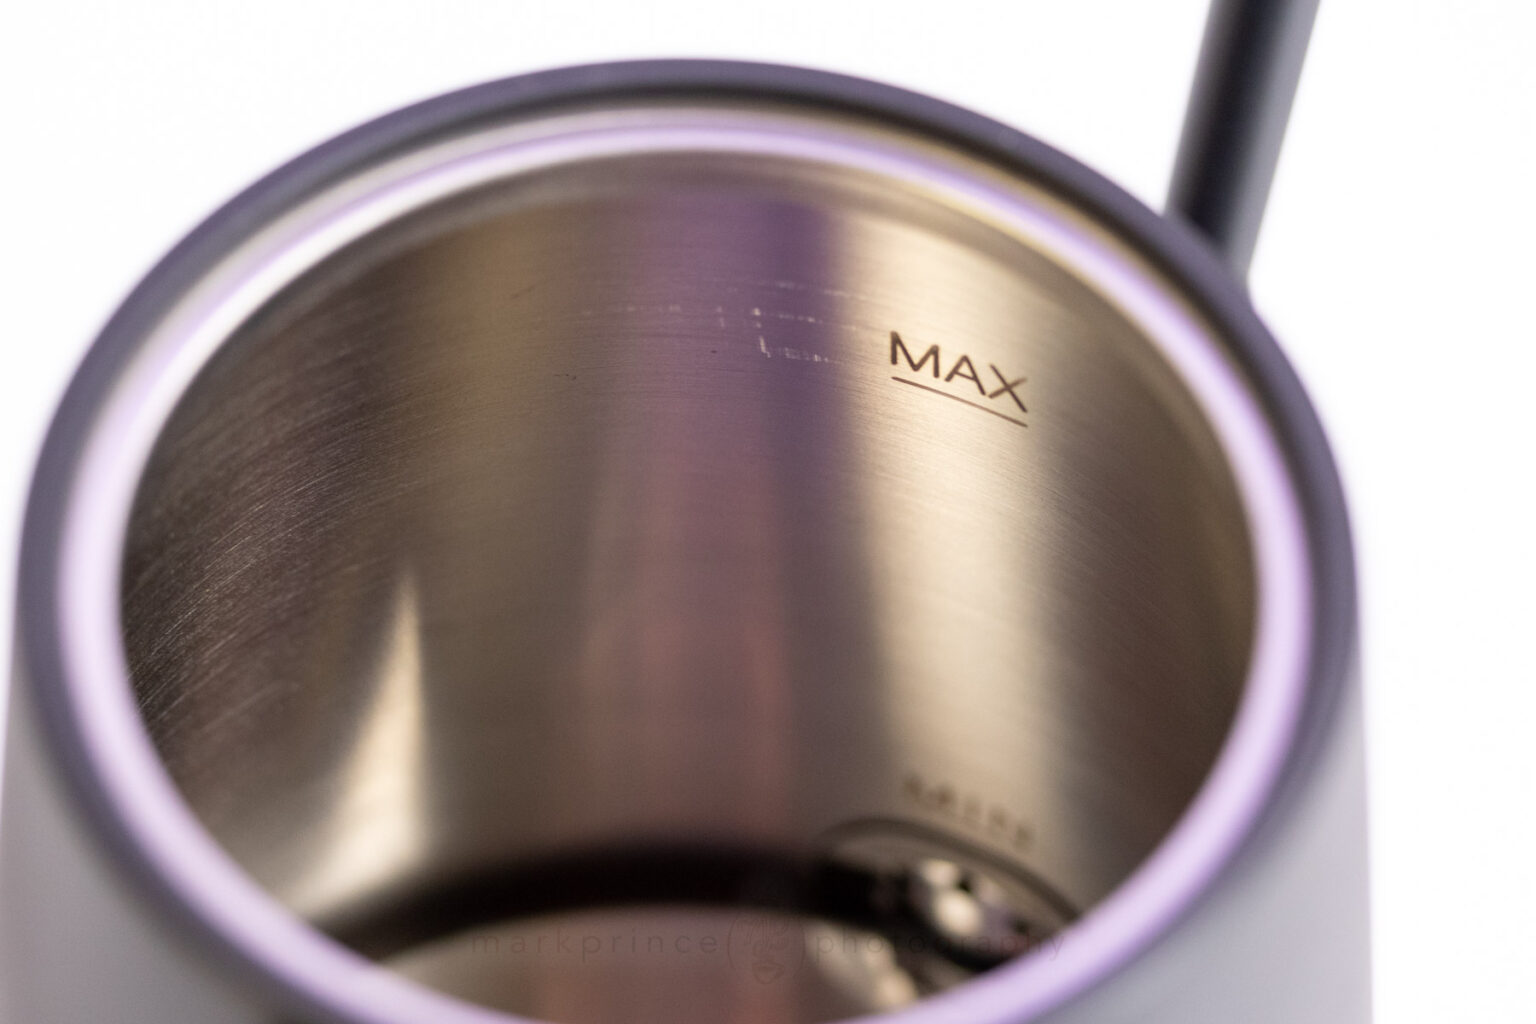 The inside max-volume indicator is easy to read and reference. 900ml to the max line.